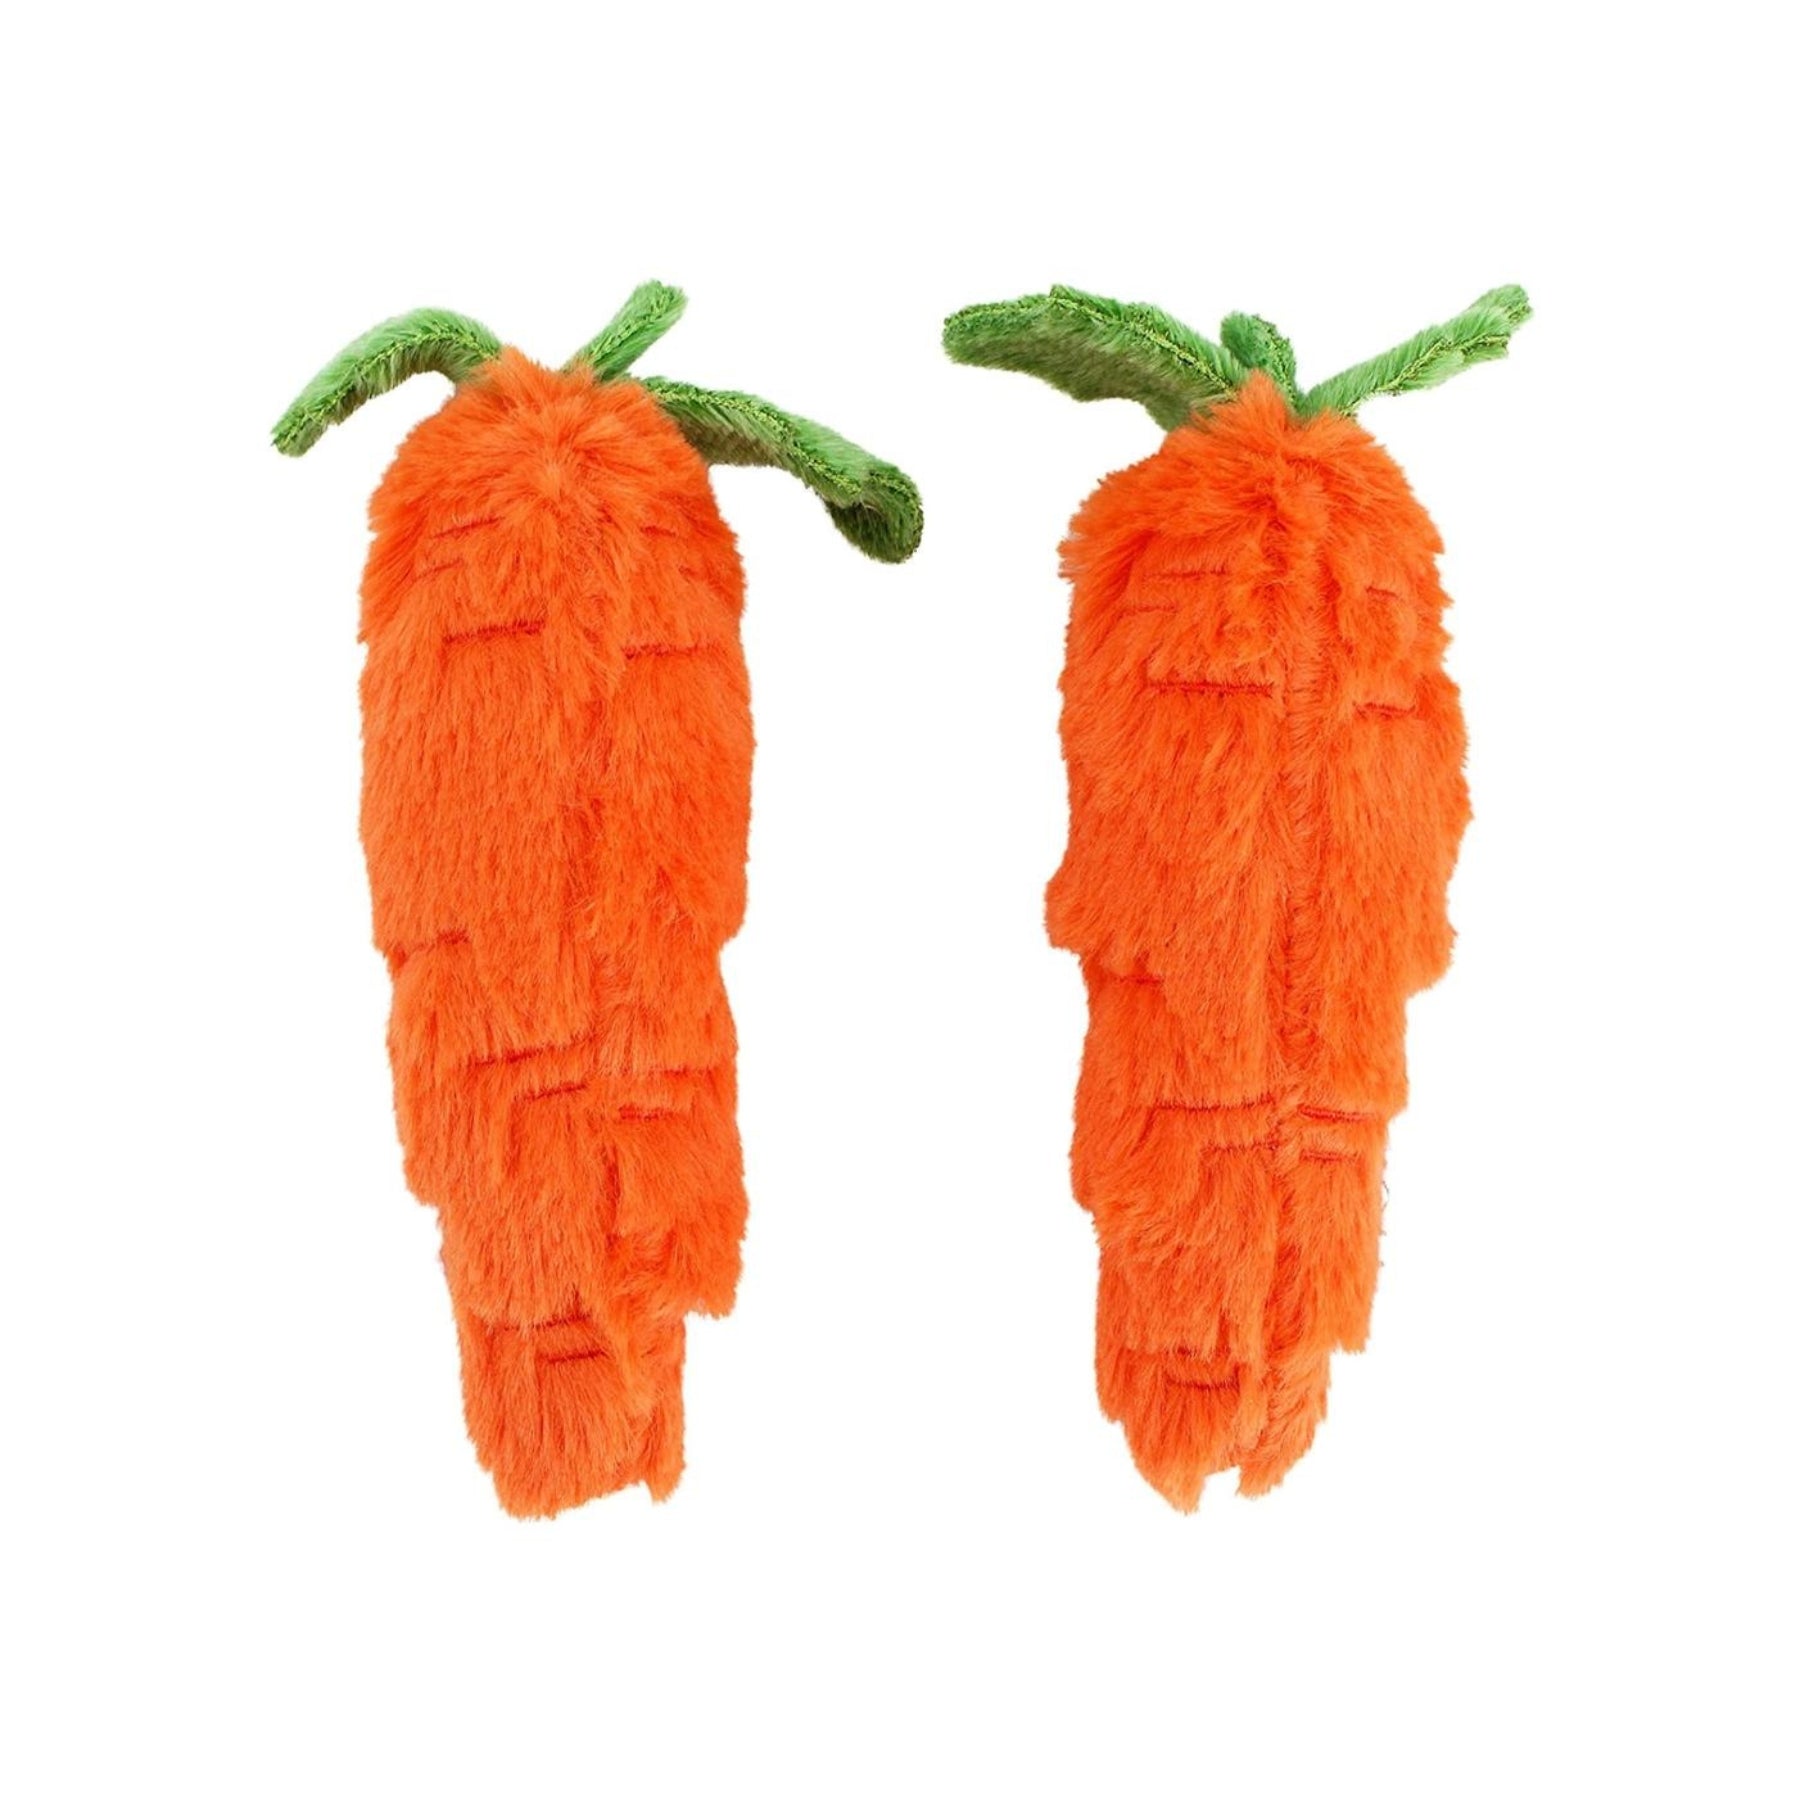 Plush Carrot Easter Dog Toy - Pack of 2 - Pooch Luxury